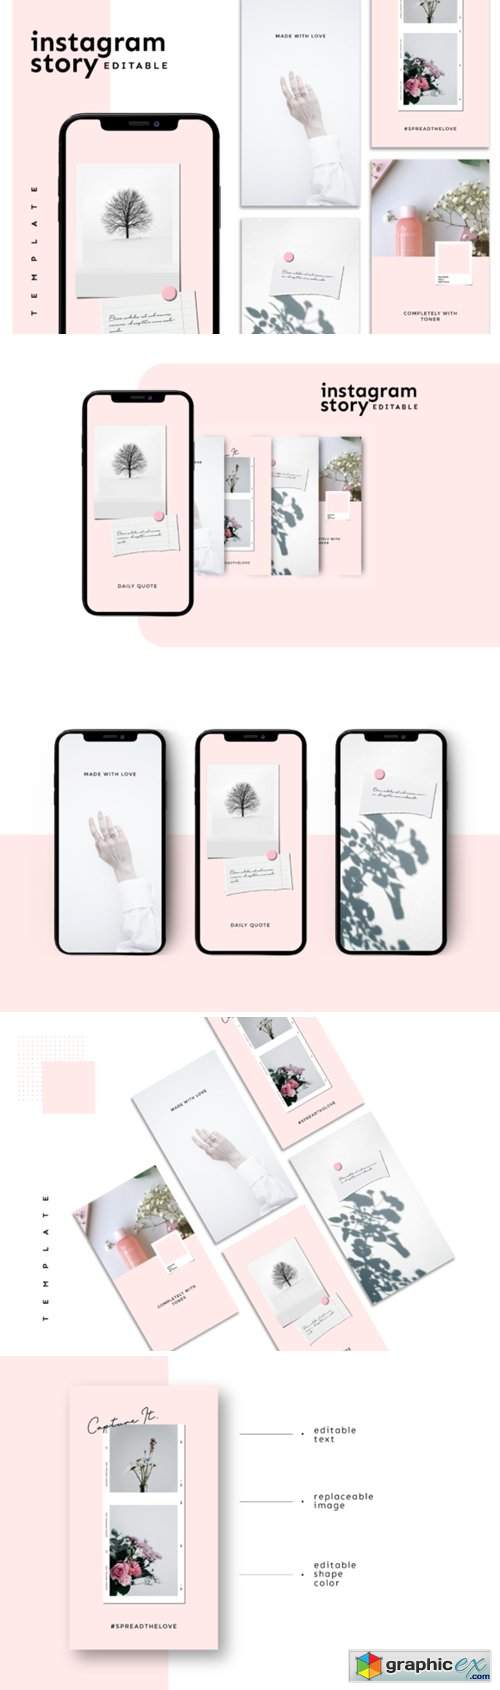  Instagram Story Template 3826817 